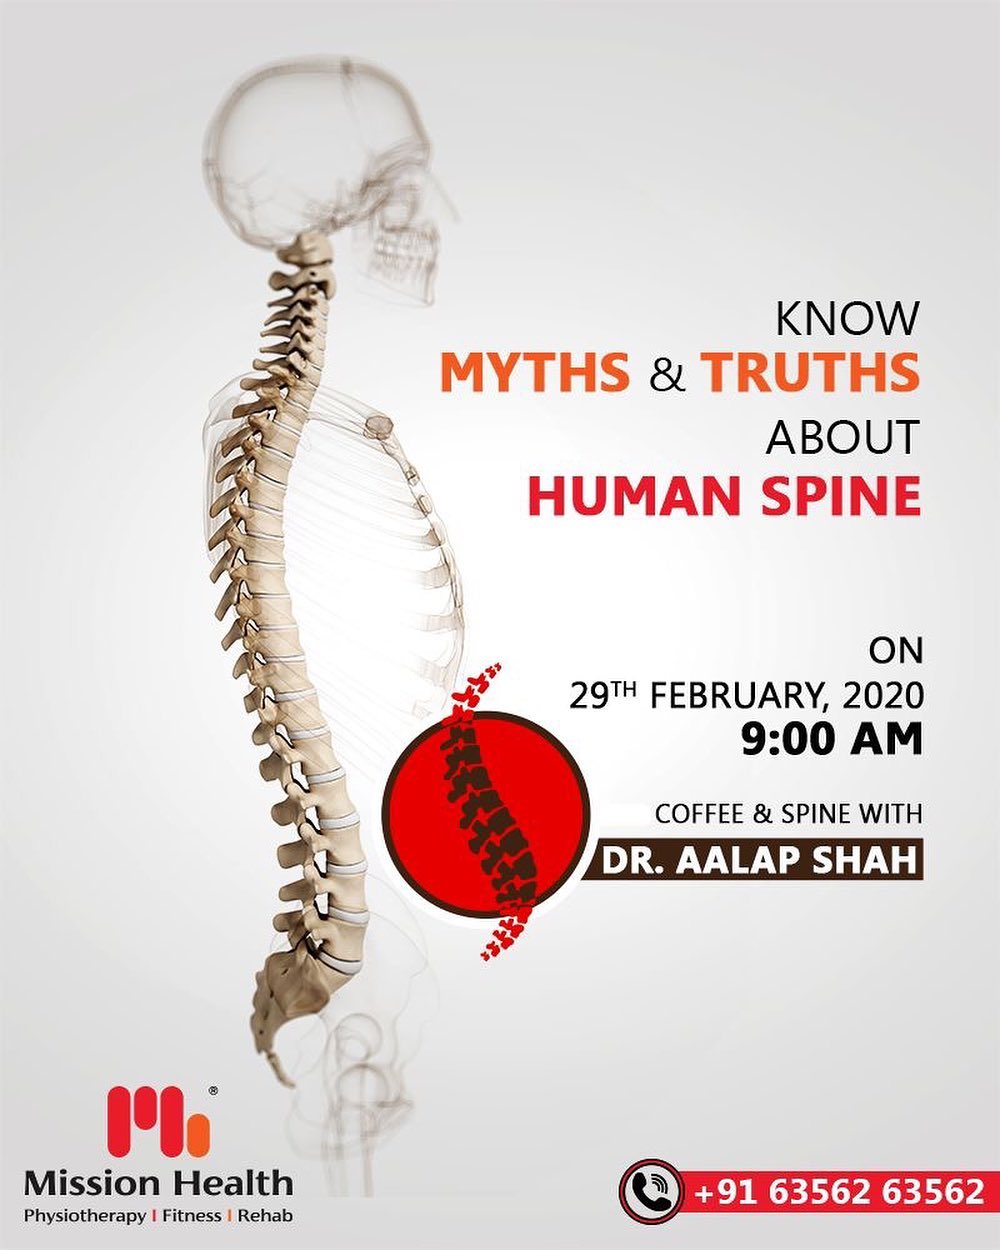 Coffee & Spine with Dr. Aalap Shah is just a DAY away!
Learn interesting facts about the Human Spine and discuss your Spine Problems in a uniquely designed event at Mission Health

Human Spine is a very complex yet miraculous structure.
Know Myths & Truths about Human Spine over a Coffee...
Tomorrow, 29th February 2020

Call: +916356263562
Visit: www.missionhealth.co.in

#CoffeeAndSpineWithDrAalapShah #DrAalapShah #SuperSpecialitySpineClinic #SpineClinic #BackPain #NeckPain #SlippedDisc #MissionHealth #MissionHealthIndia #AbilityClinic #MovementIsLife